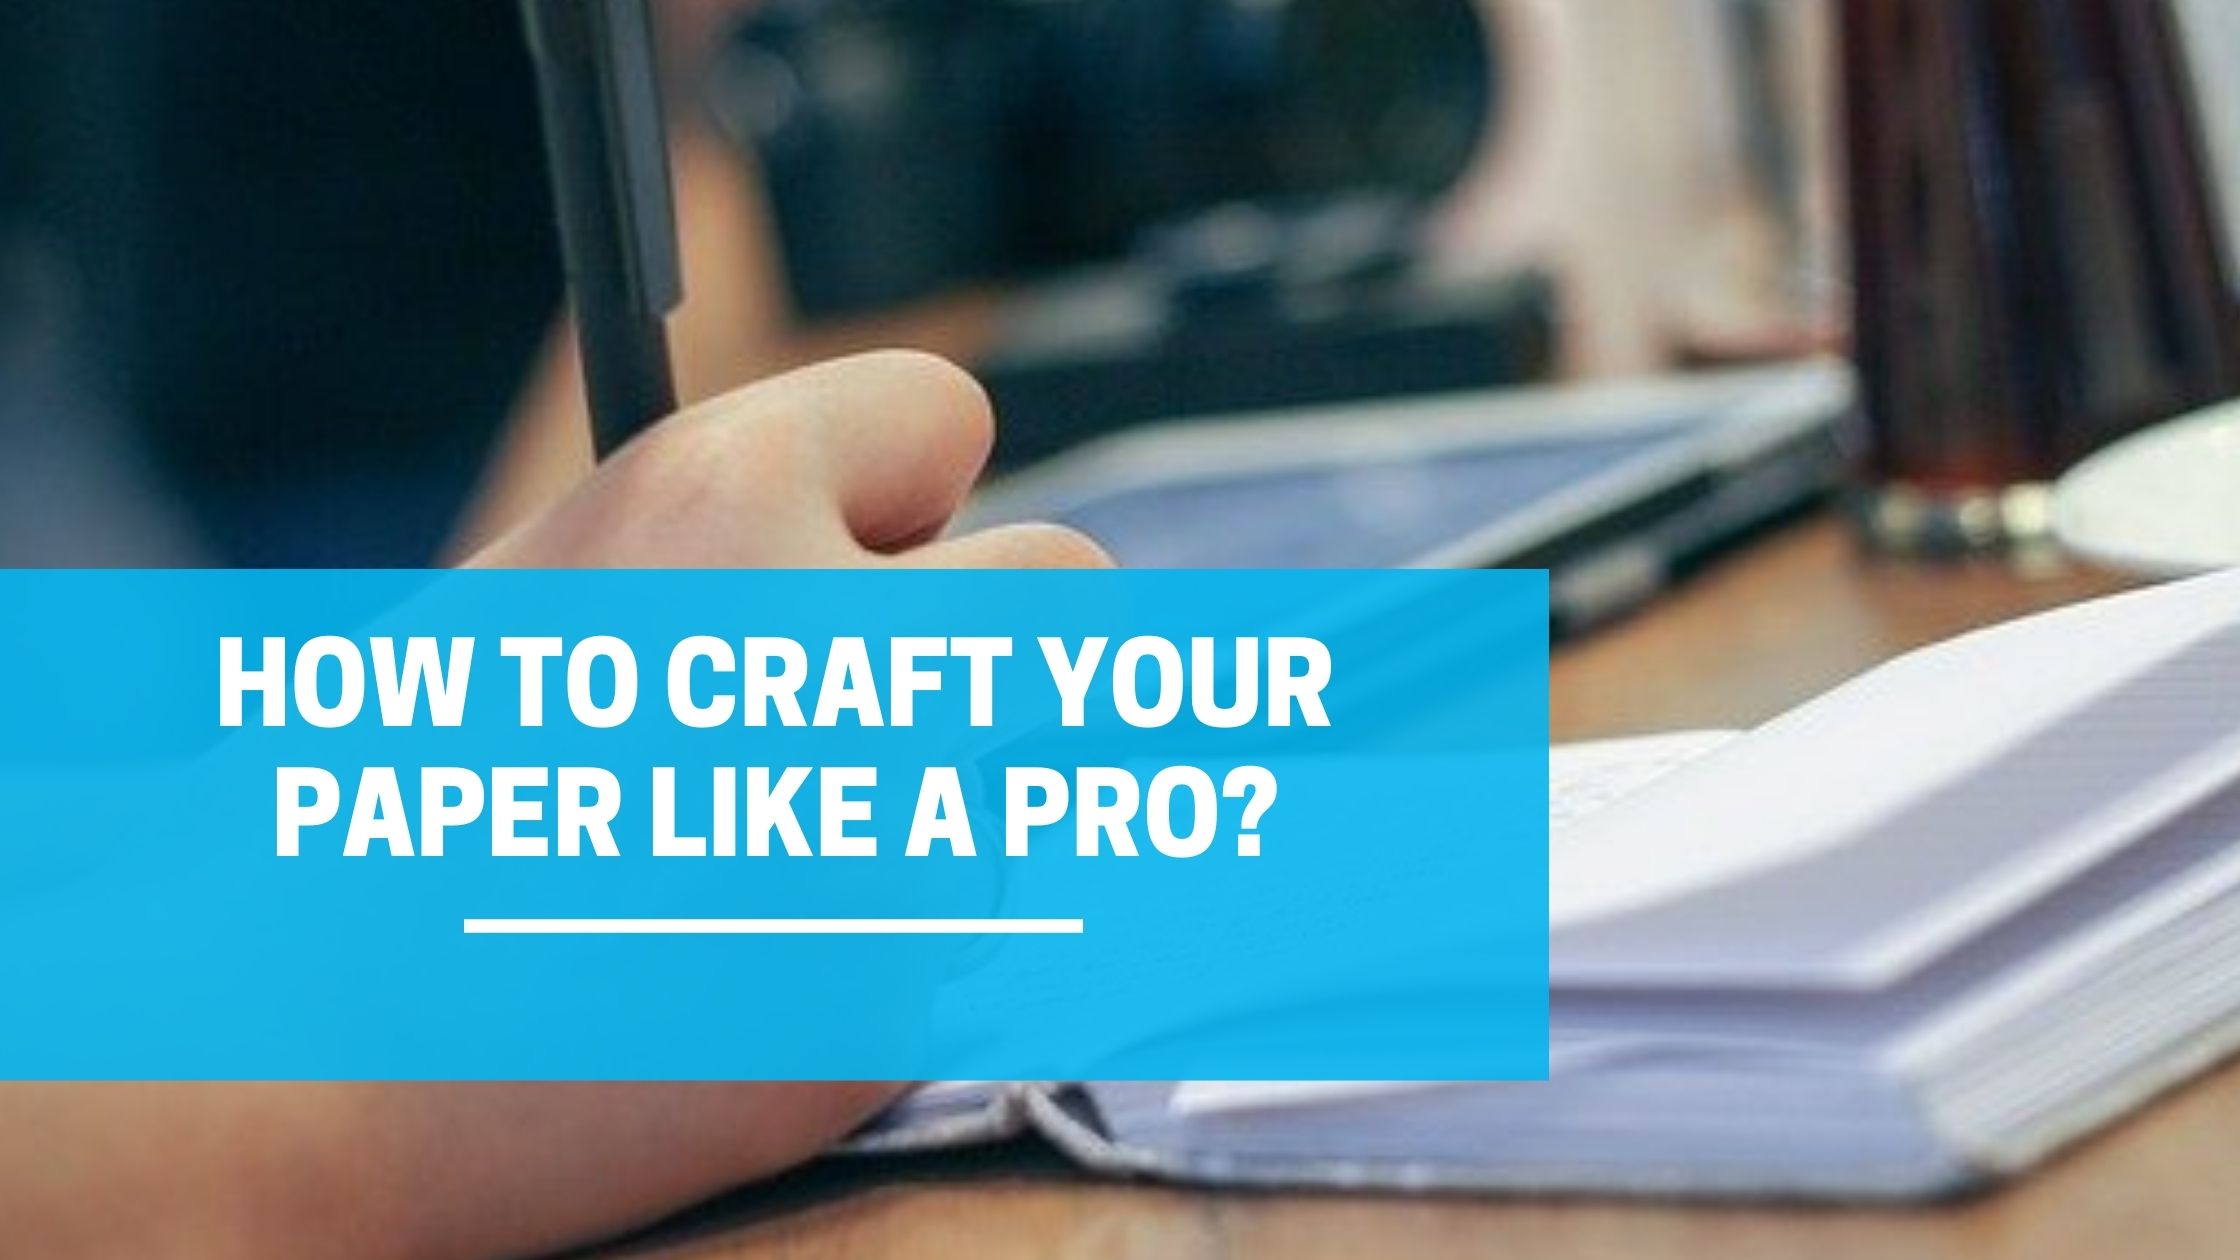 Article about How to craft your Paper like a Pro